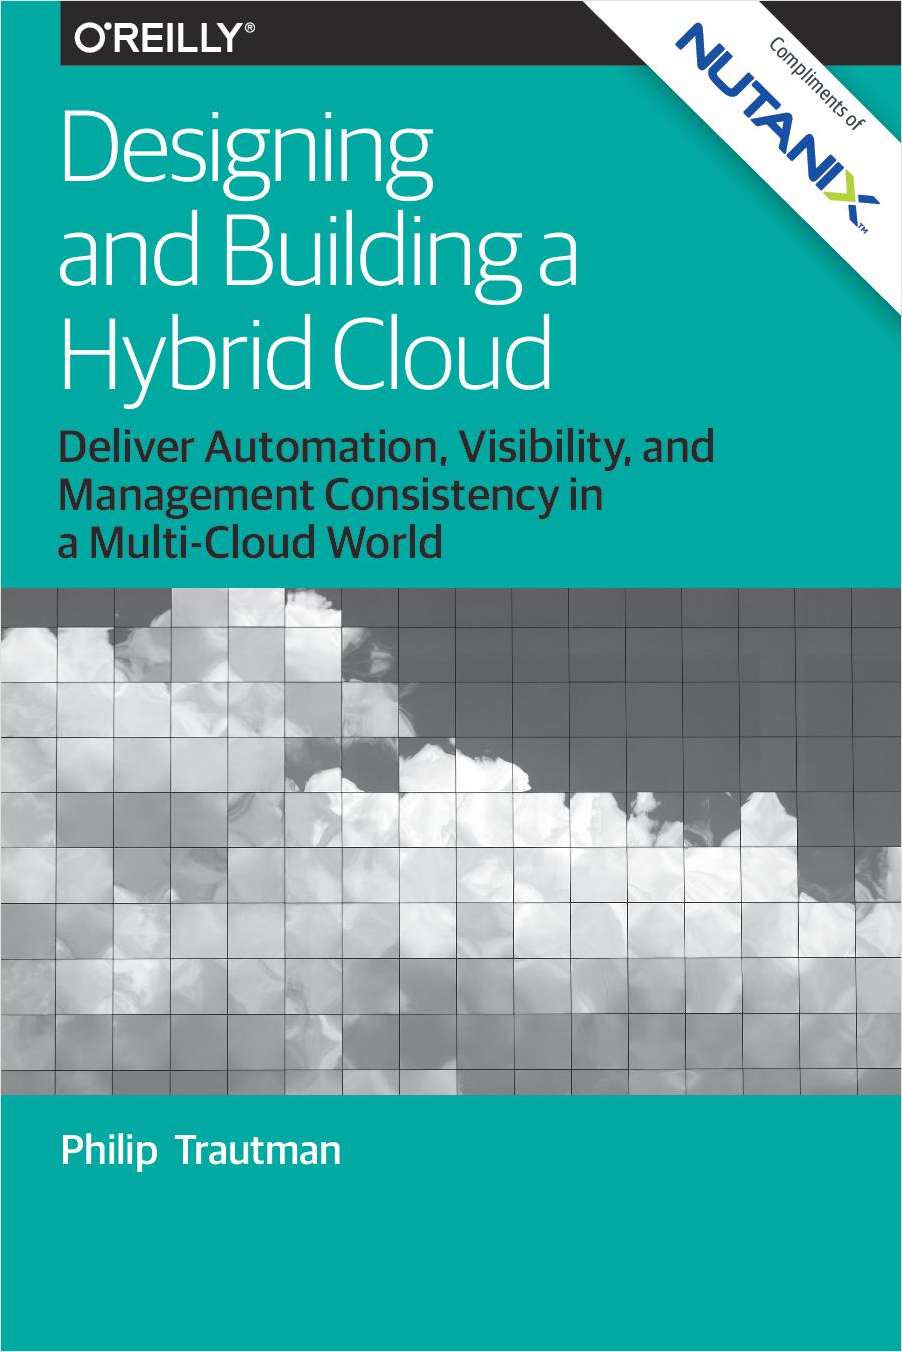 How To Build & Design a Hybrid Cloud Architecture